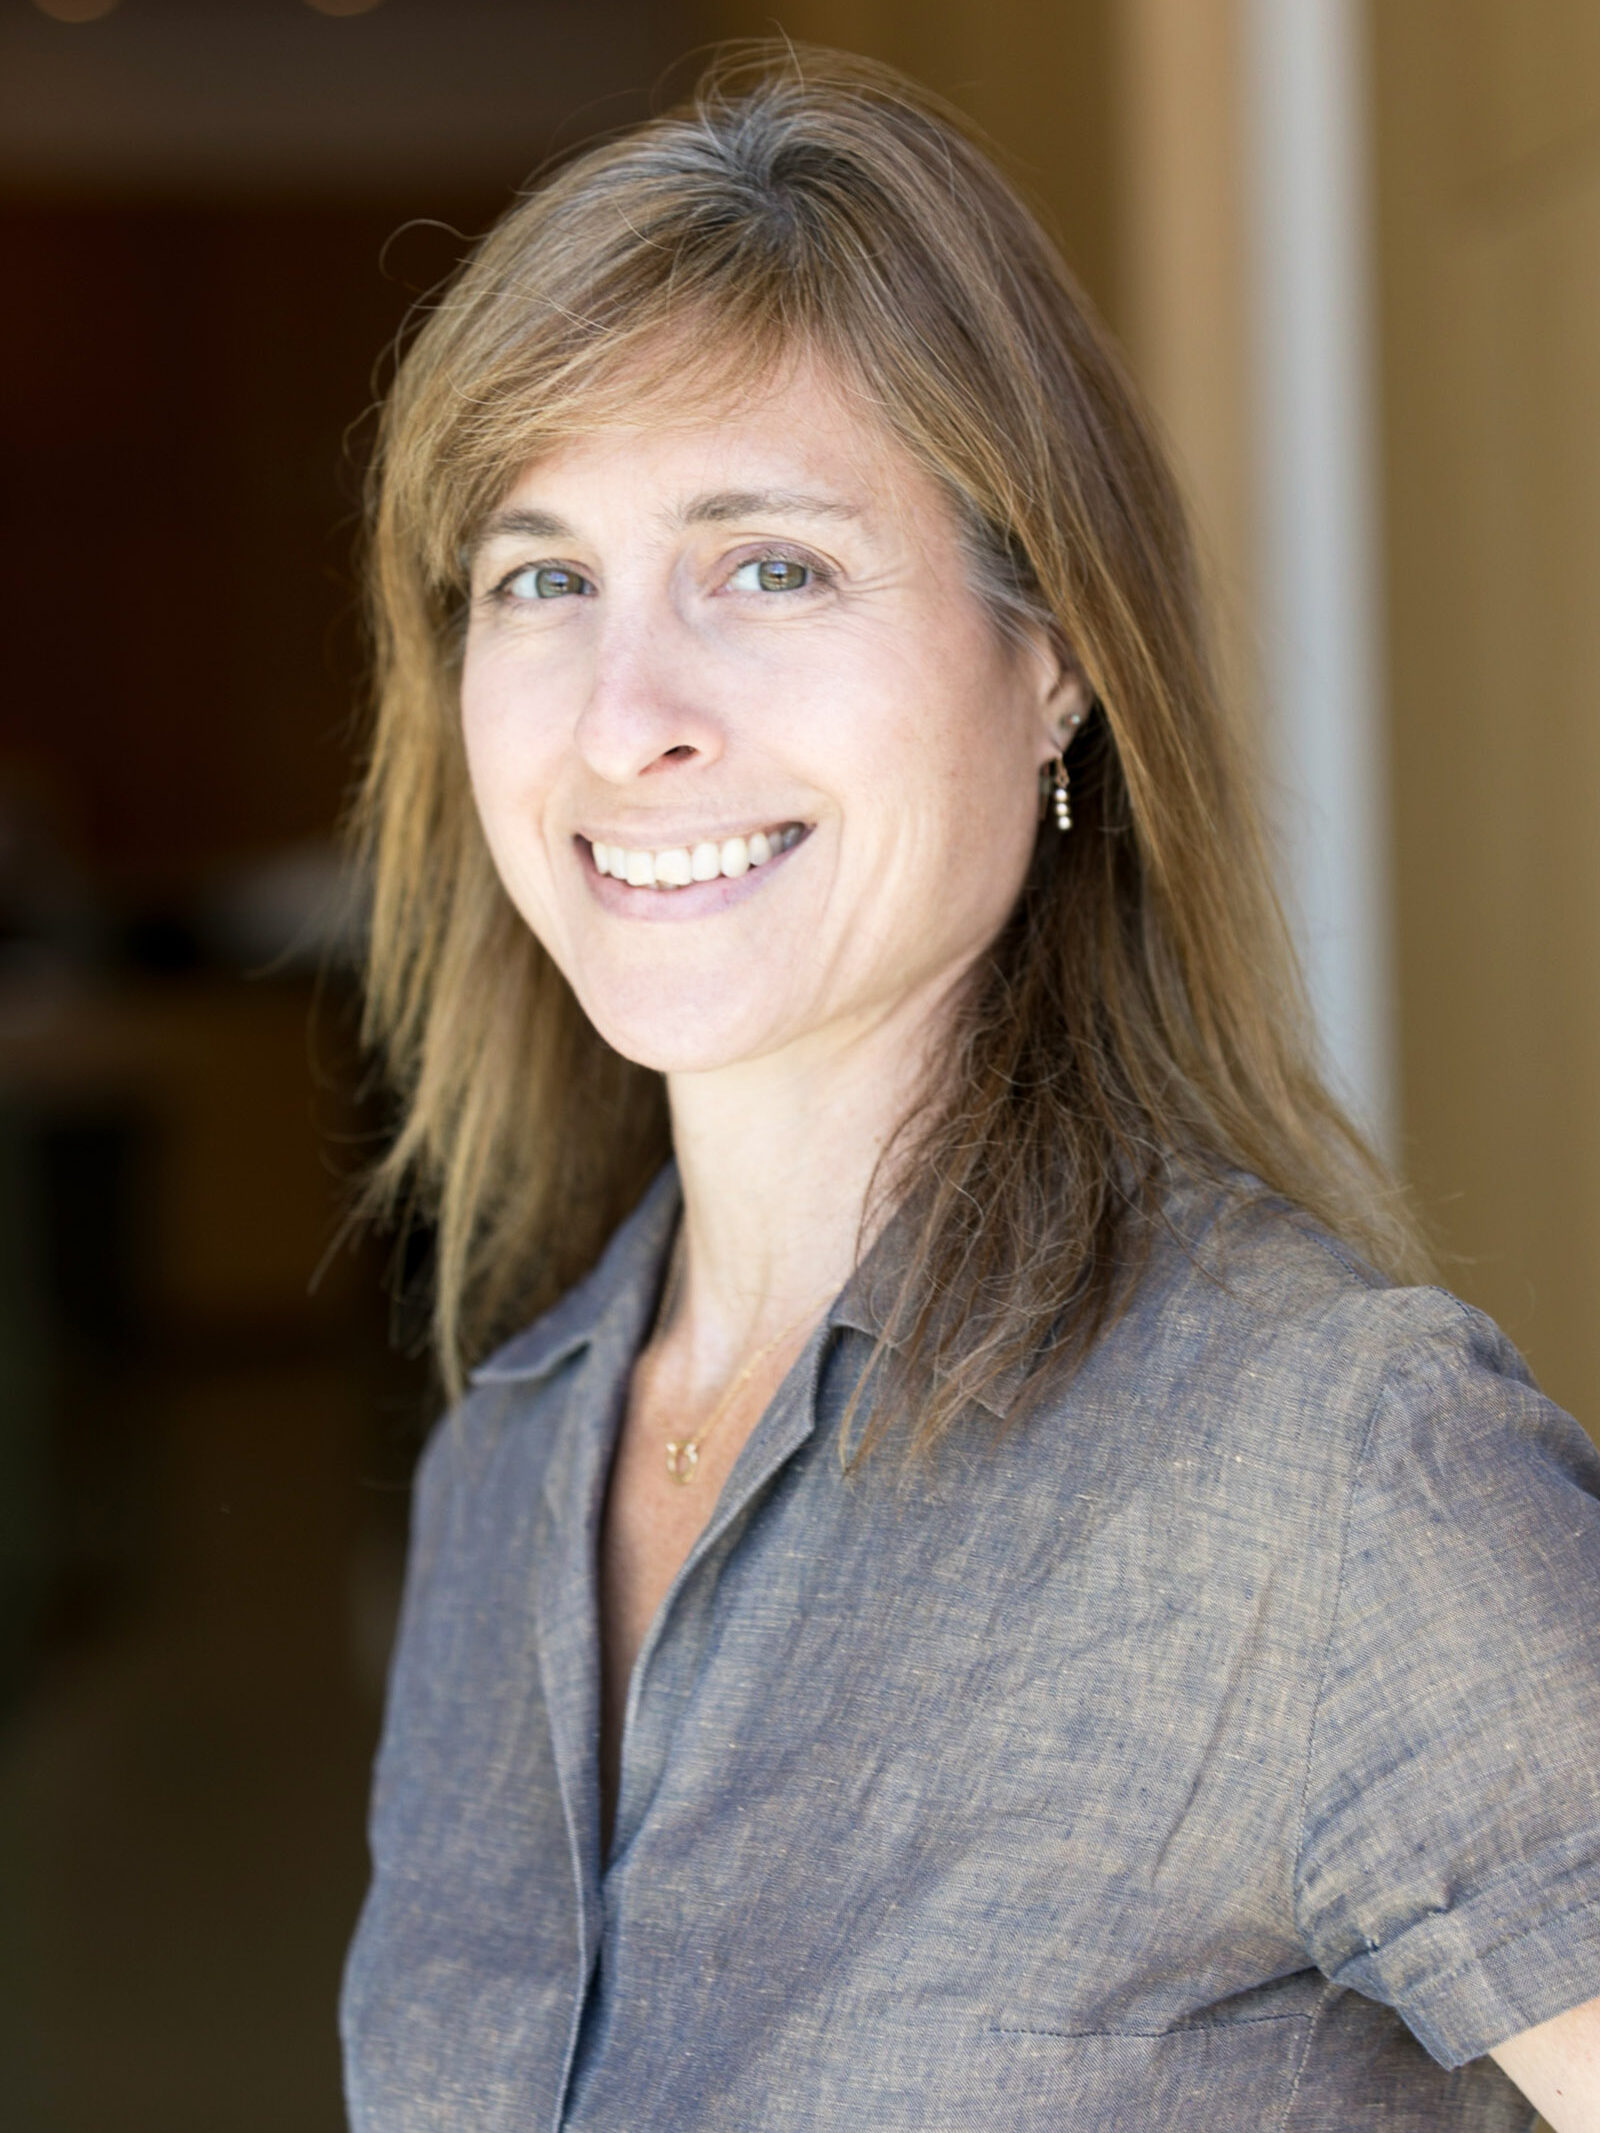 A headshot of Dr. Diane Greenfield.